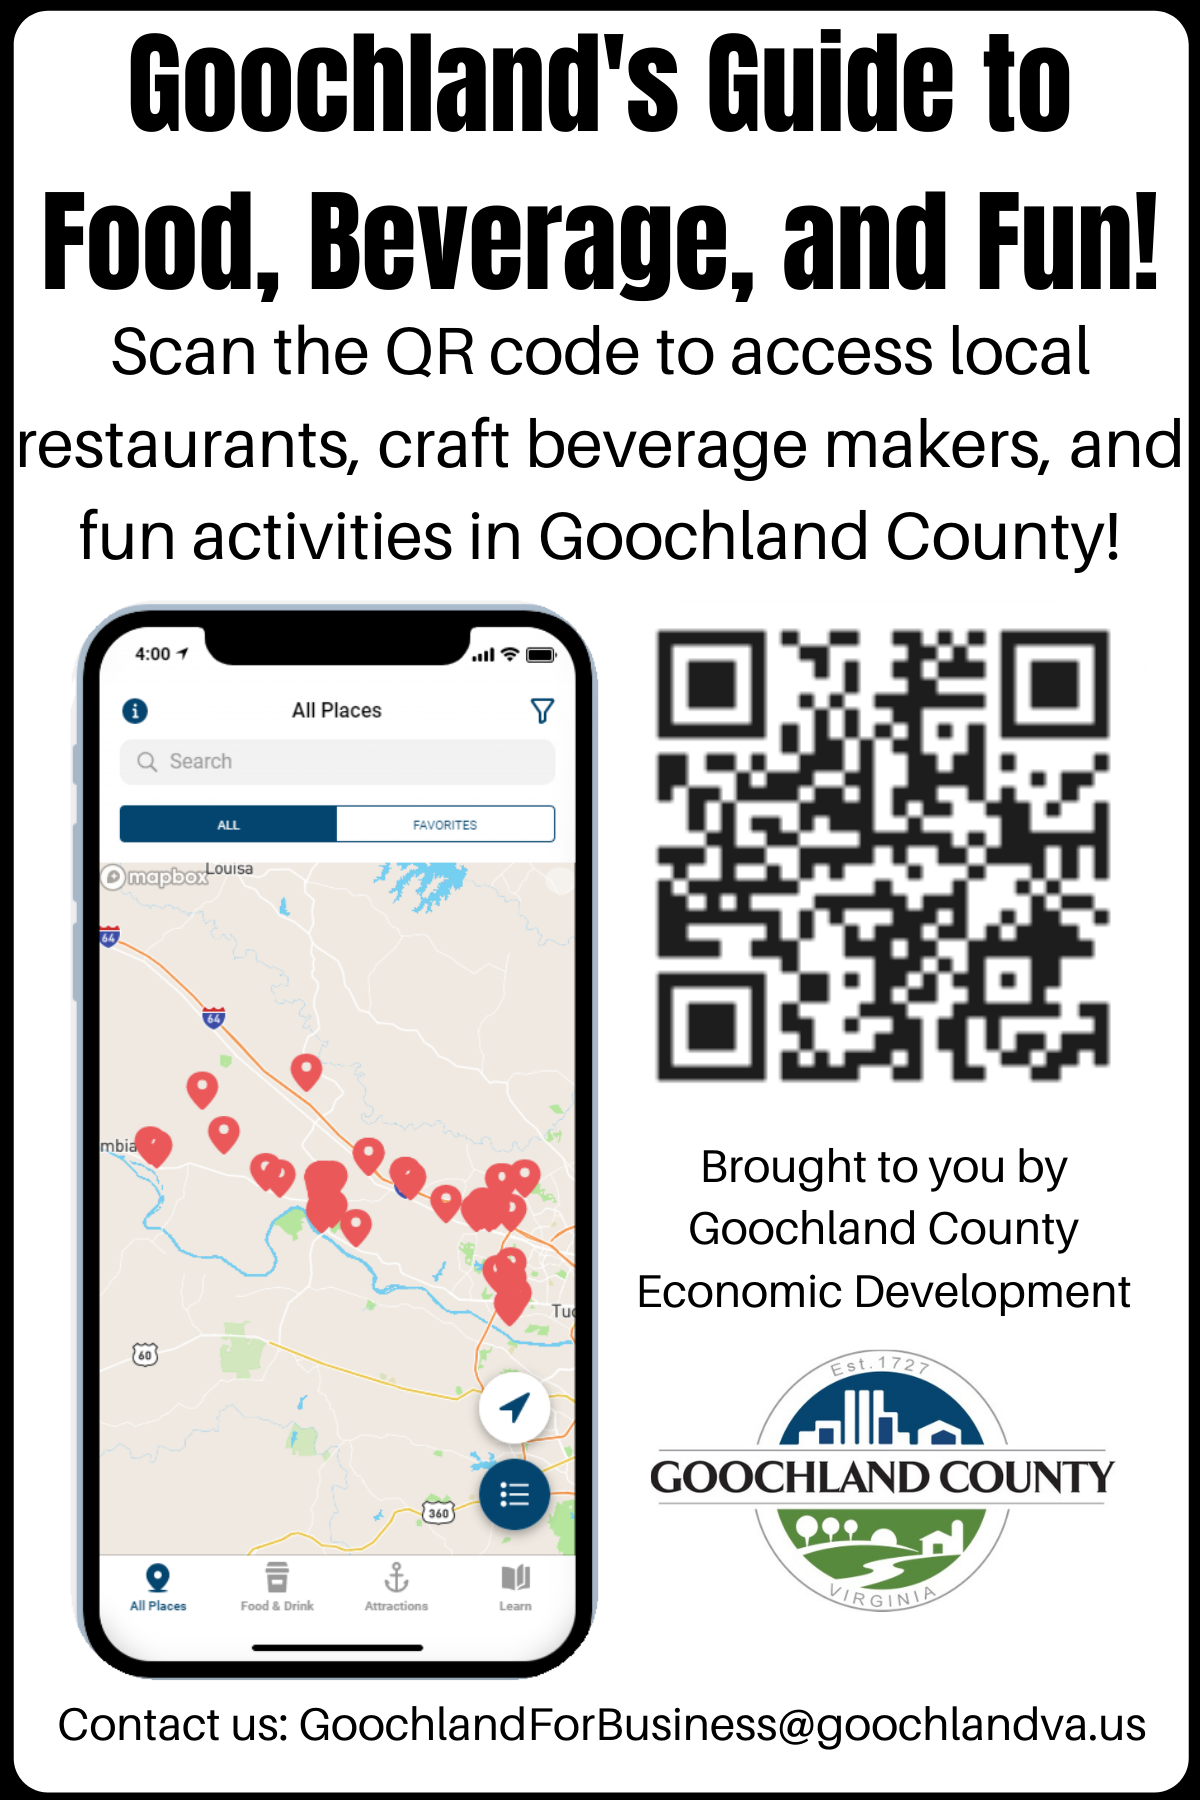 Goochland's Guide to Food, Beverage, and Fun! 